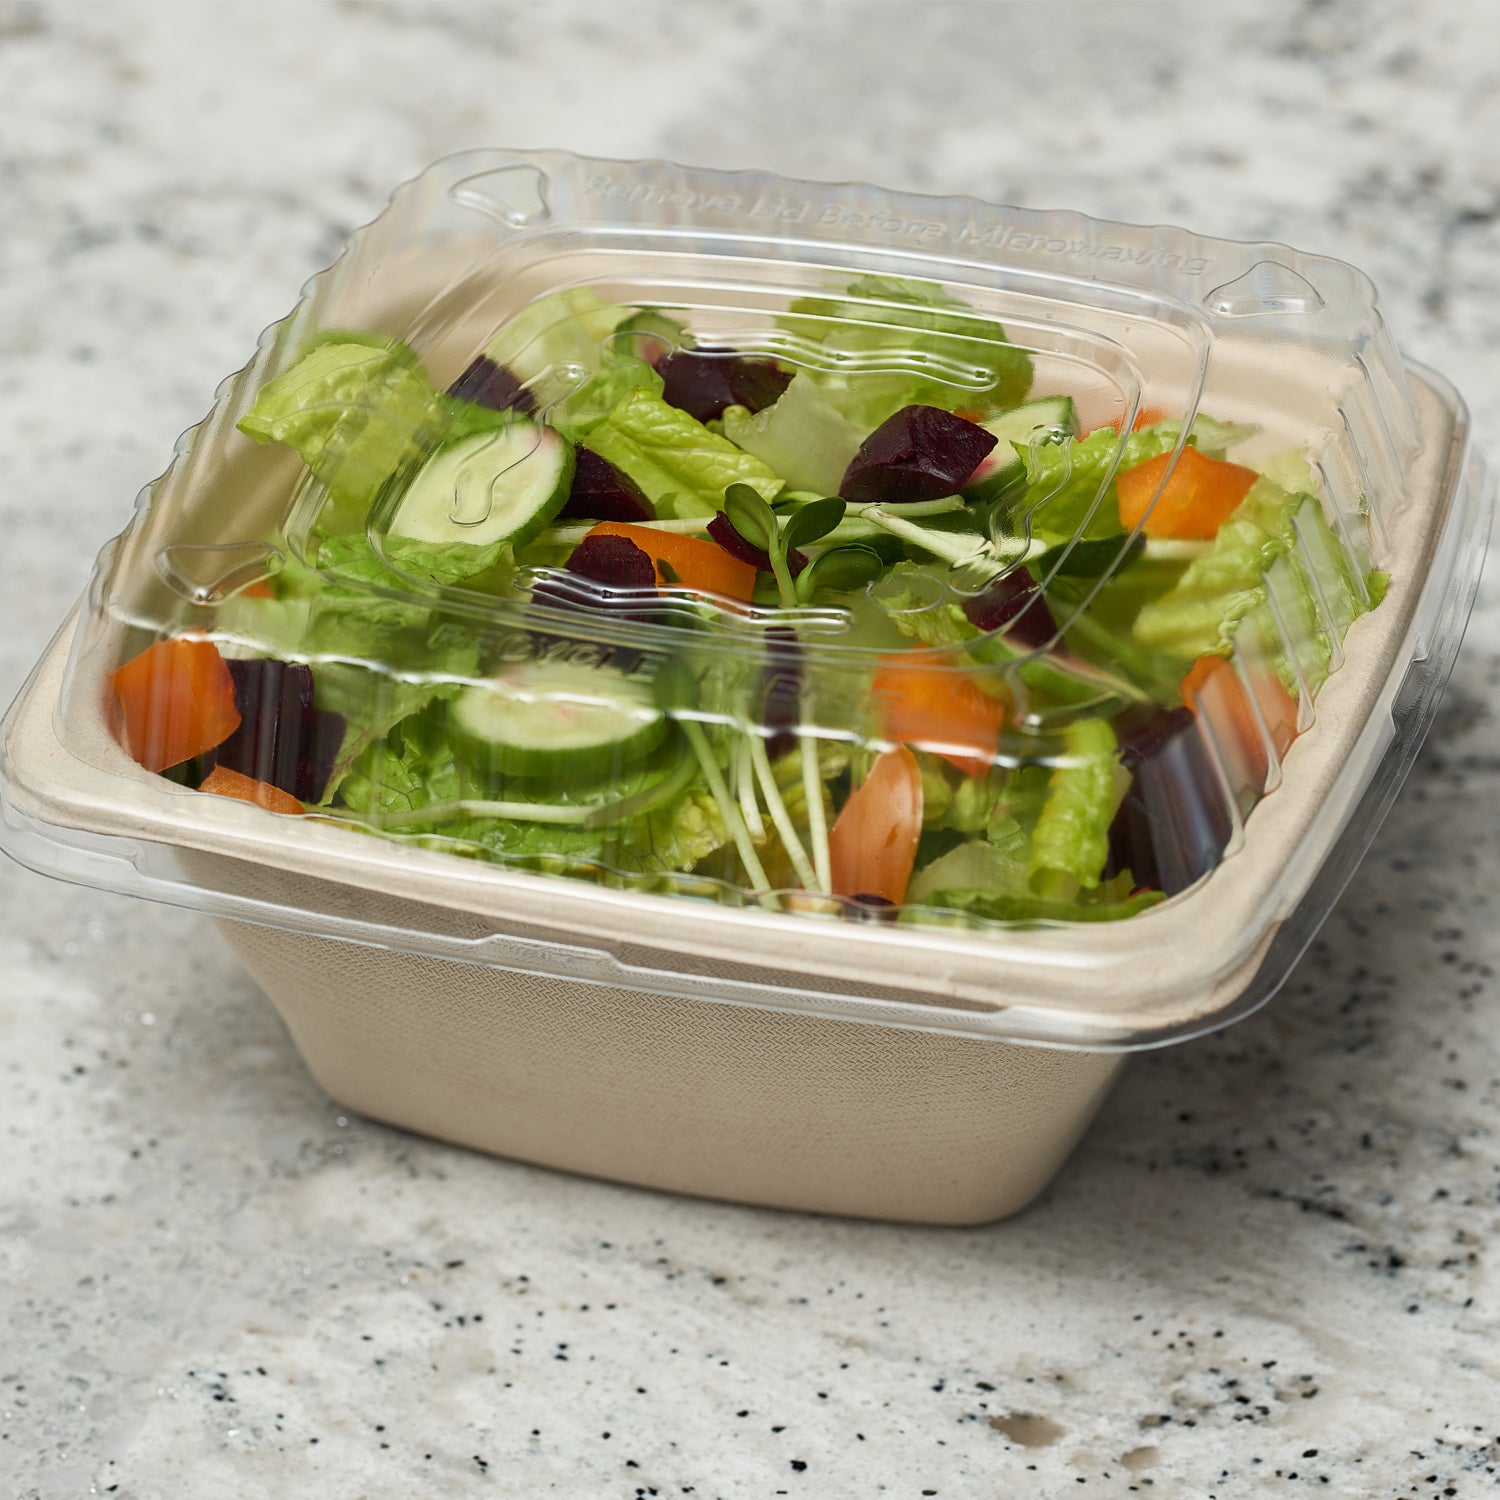 16oz Eco Friendly Disposable Square Bowls Compostable Container with Dome Lids